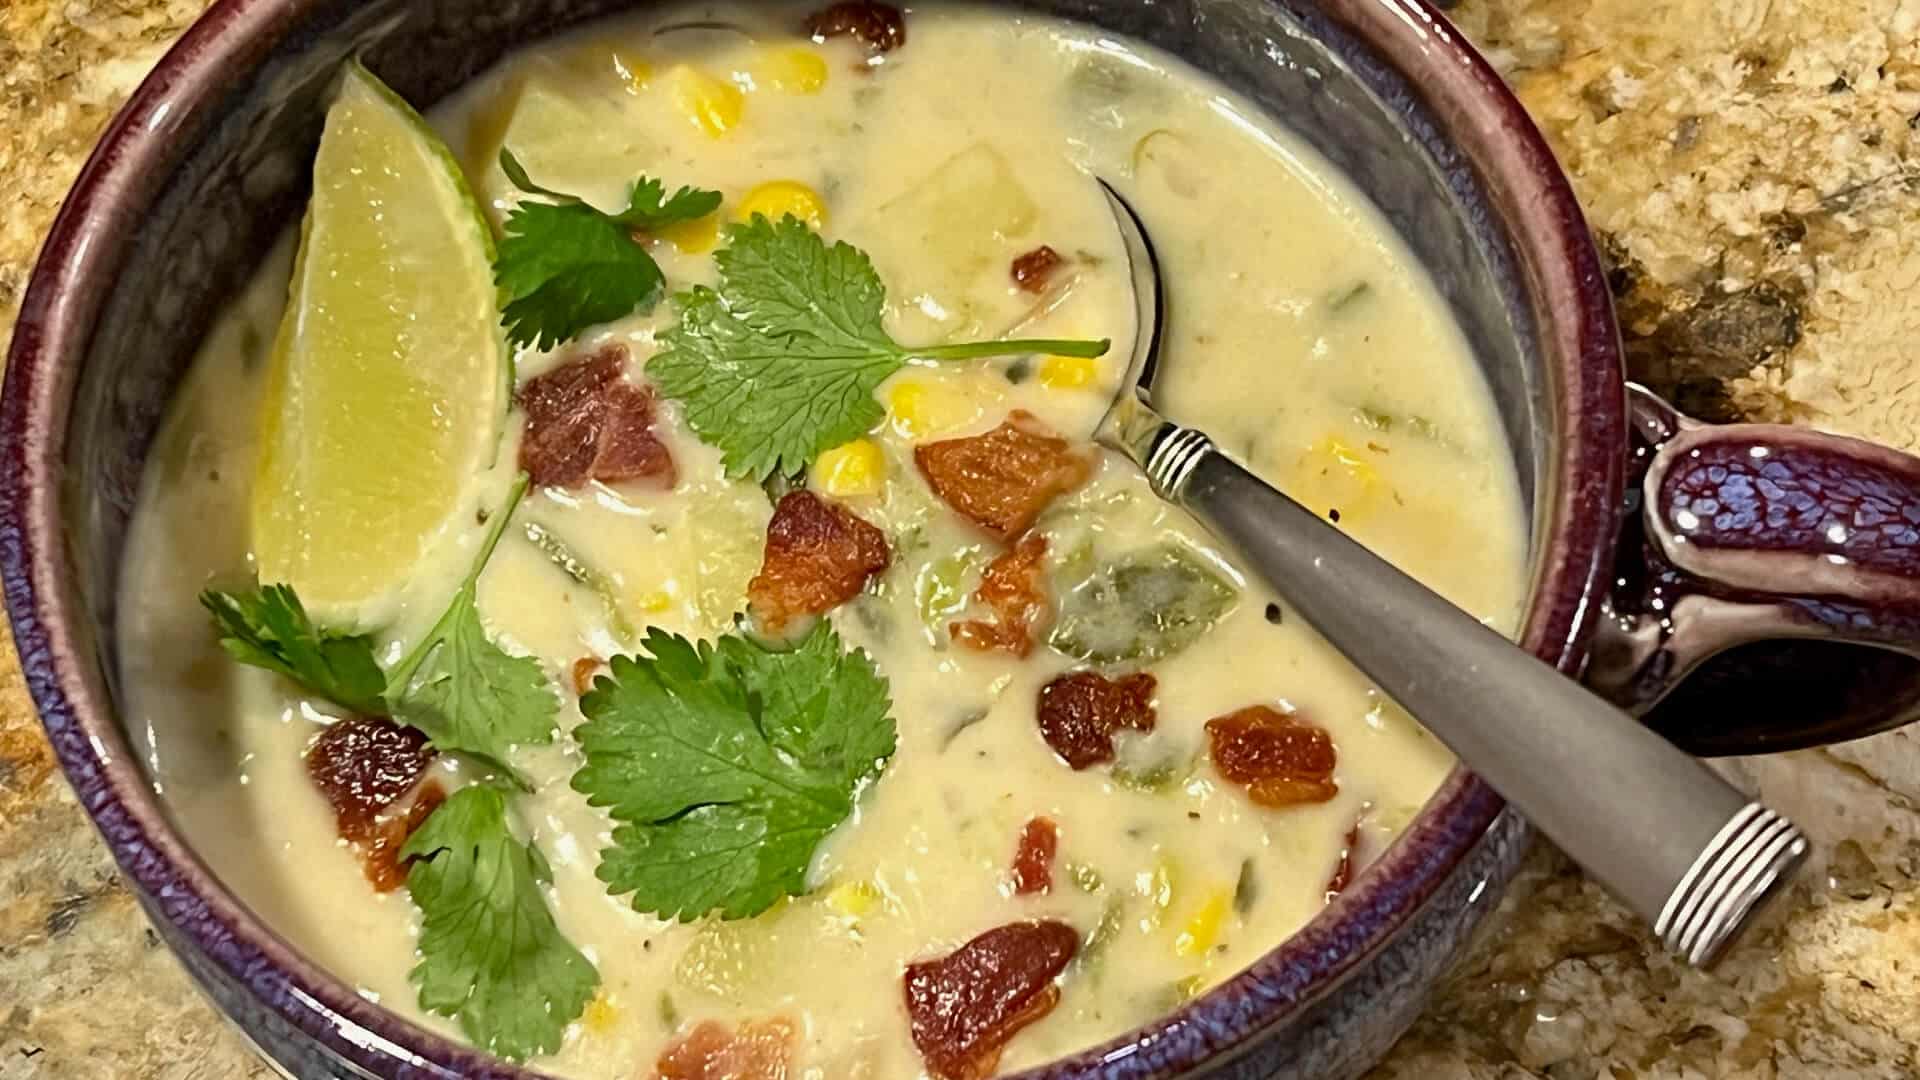 a purple bowl of creamy cheese soup with pieces of roasted poblano peppers, potatoes, and corn, garnished with crispy bacon pieces, cilantro and a lime wedge